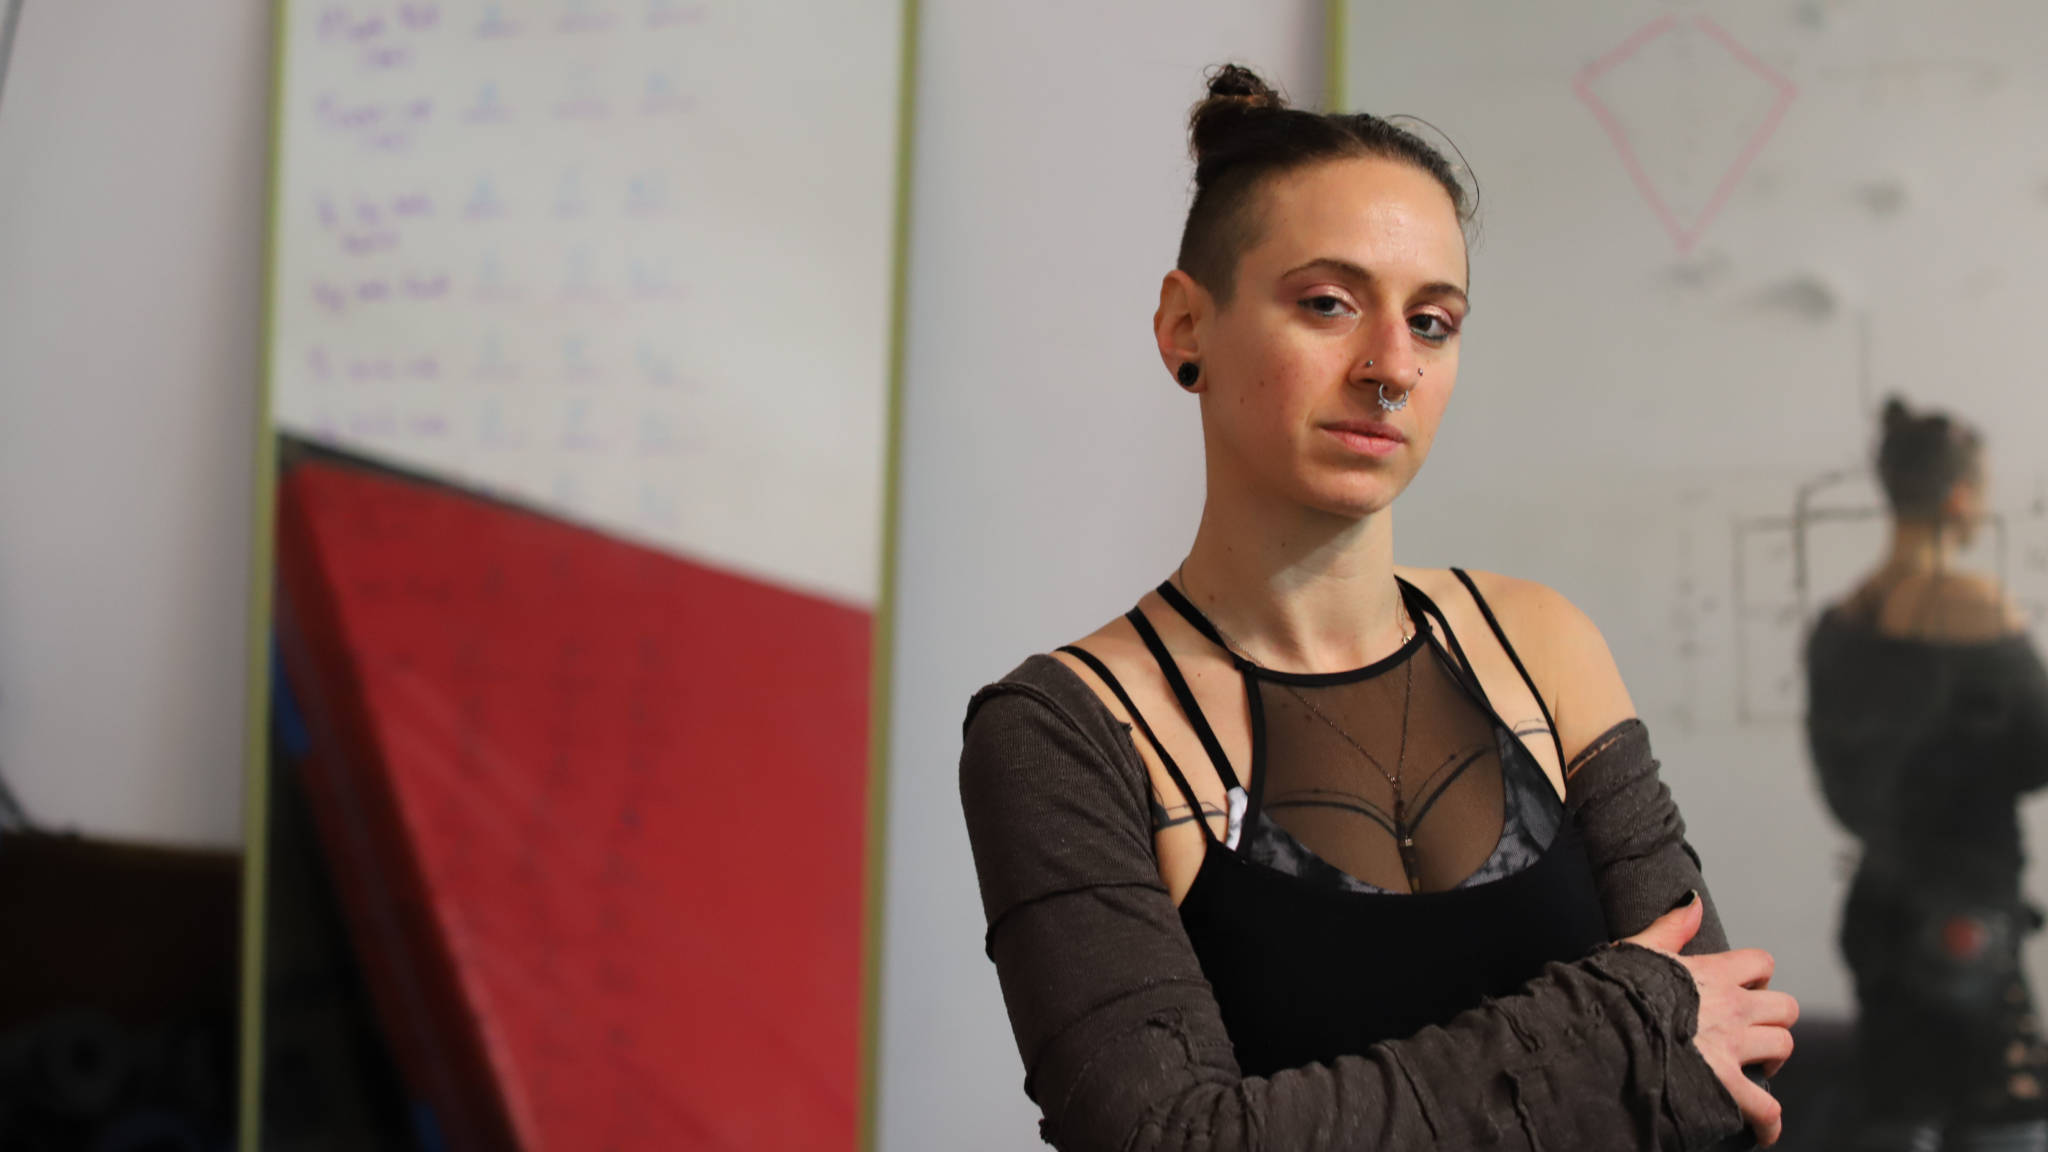 Madamn Burnz founded dance studio and events space Skyhigh Odditorium in 2012.